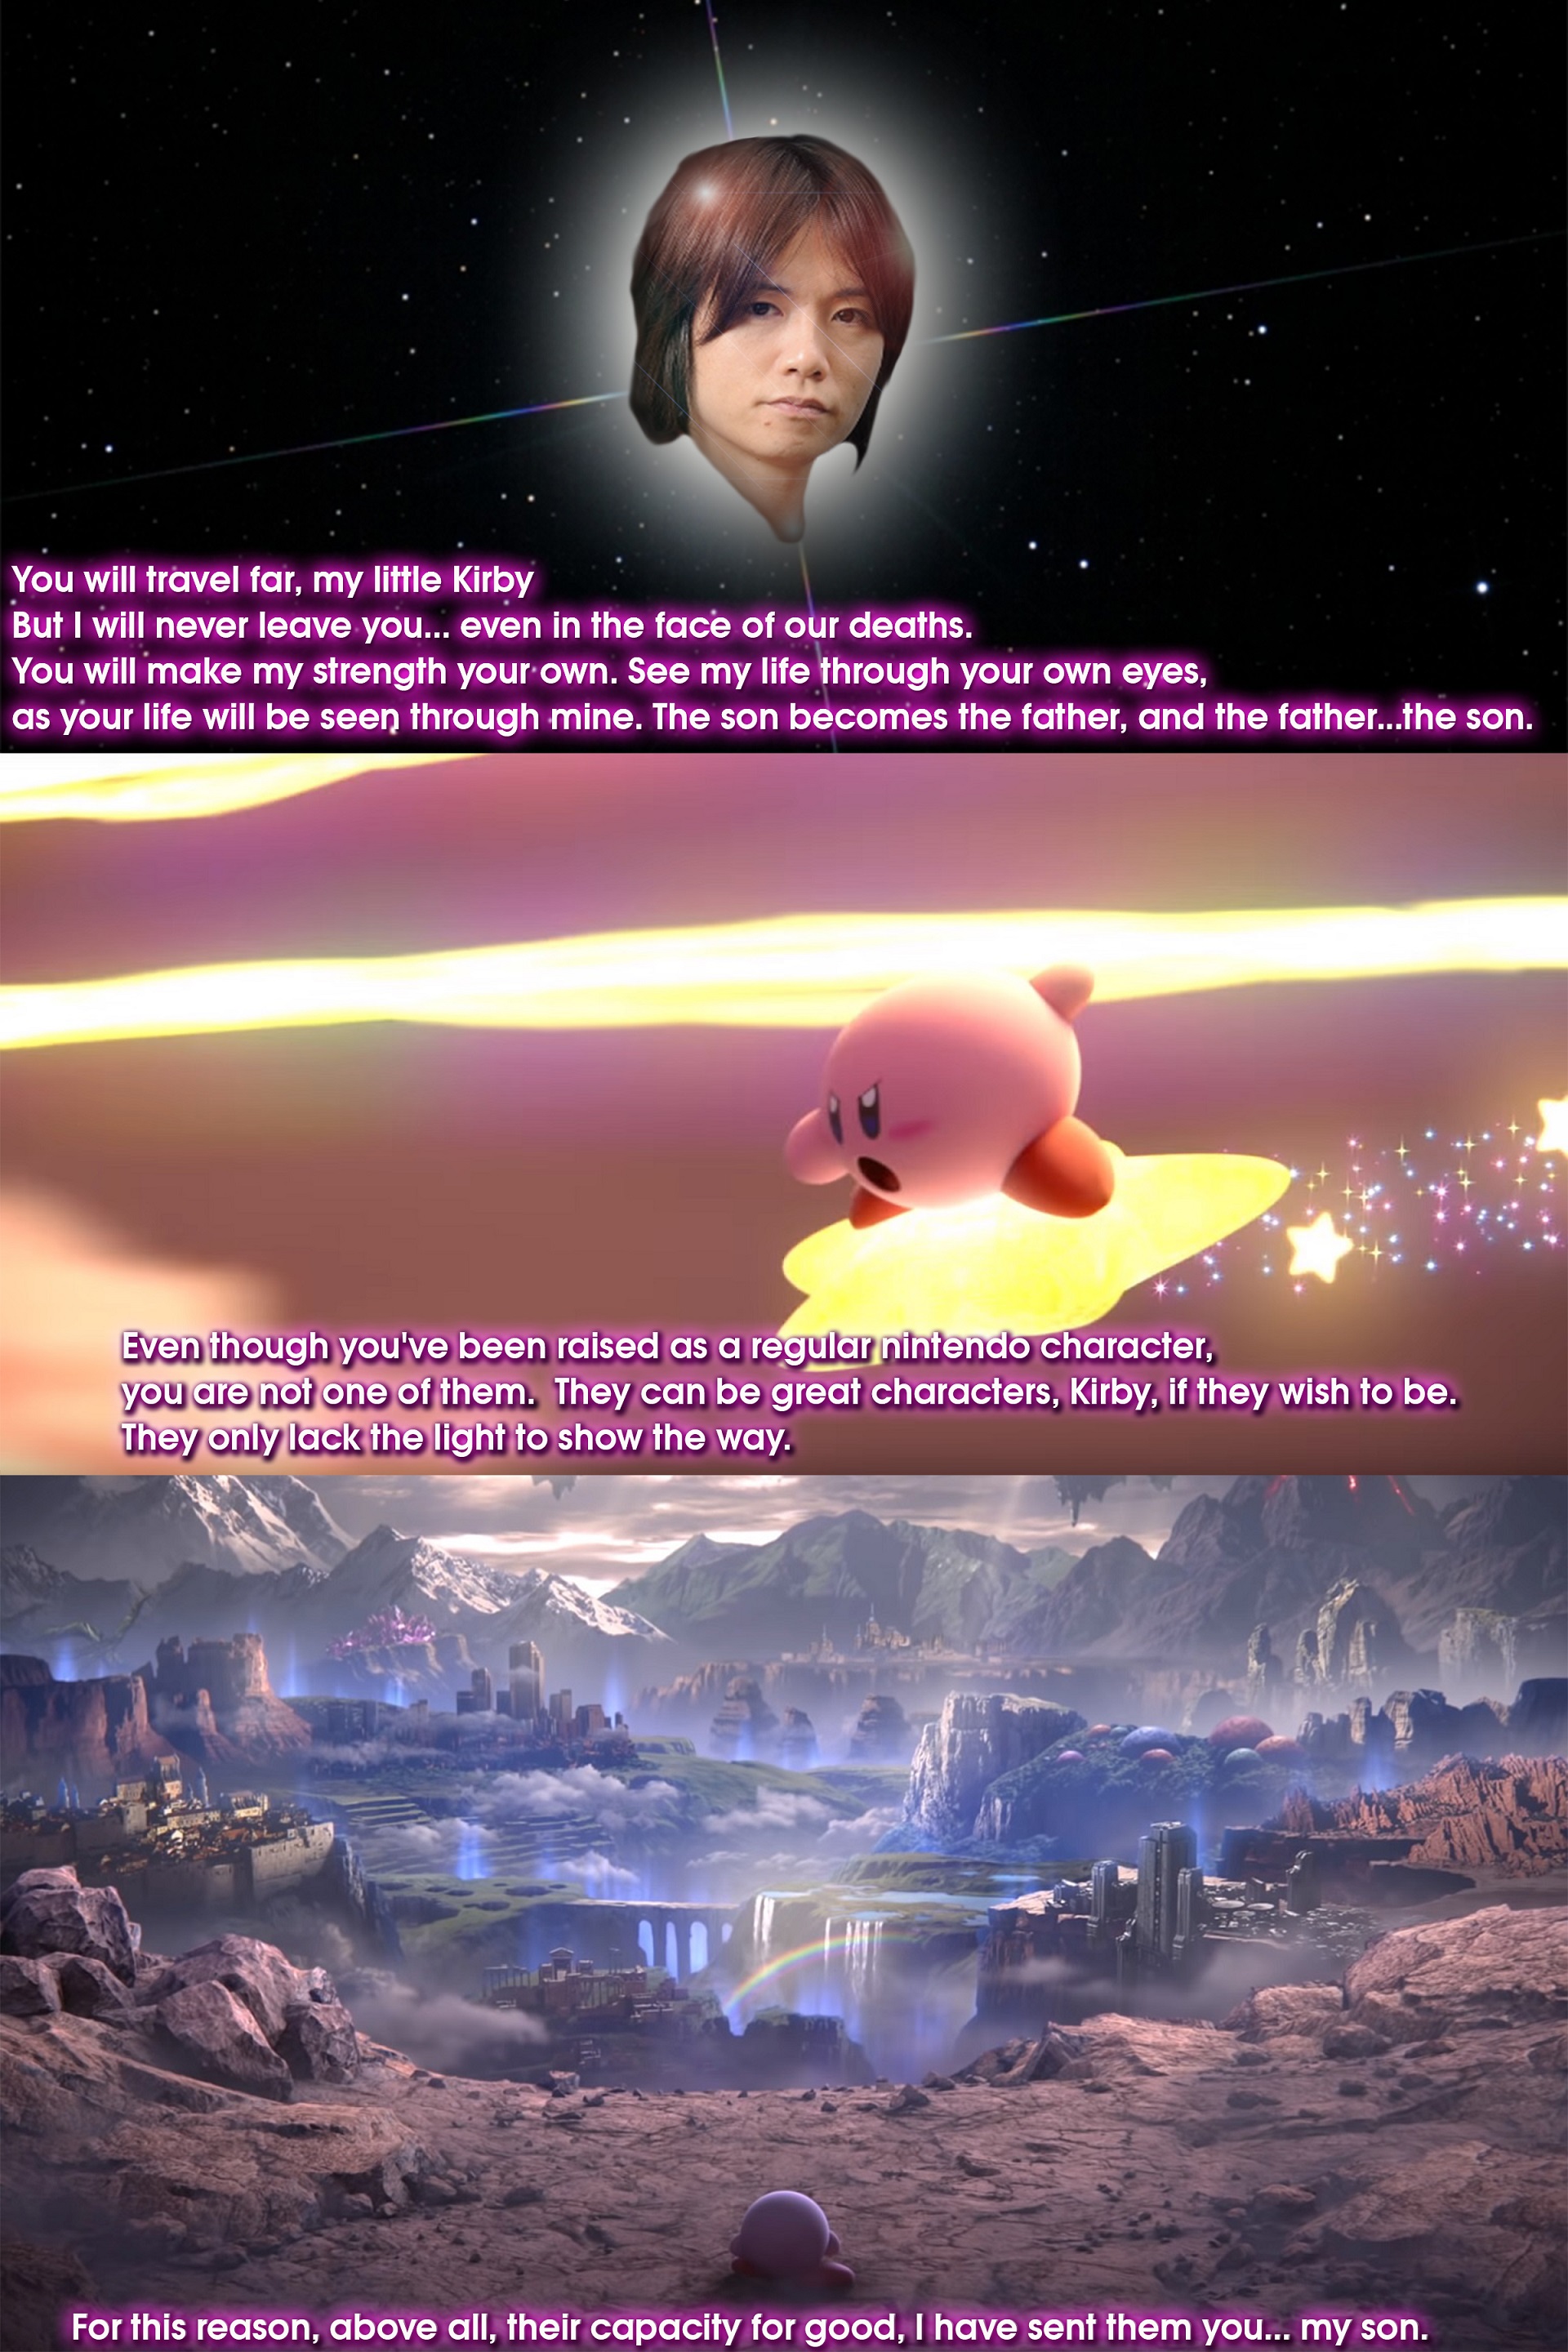 Super smash bros ultimate world of light Name of the Light and dark